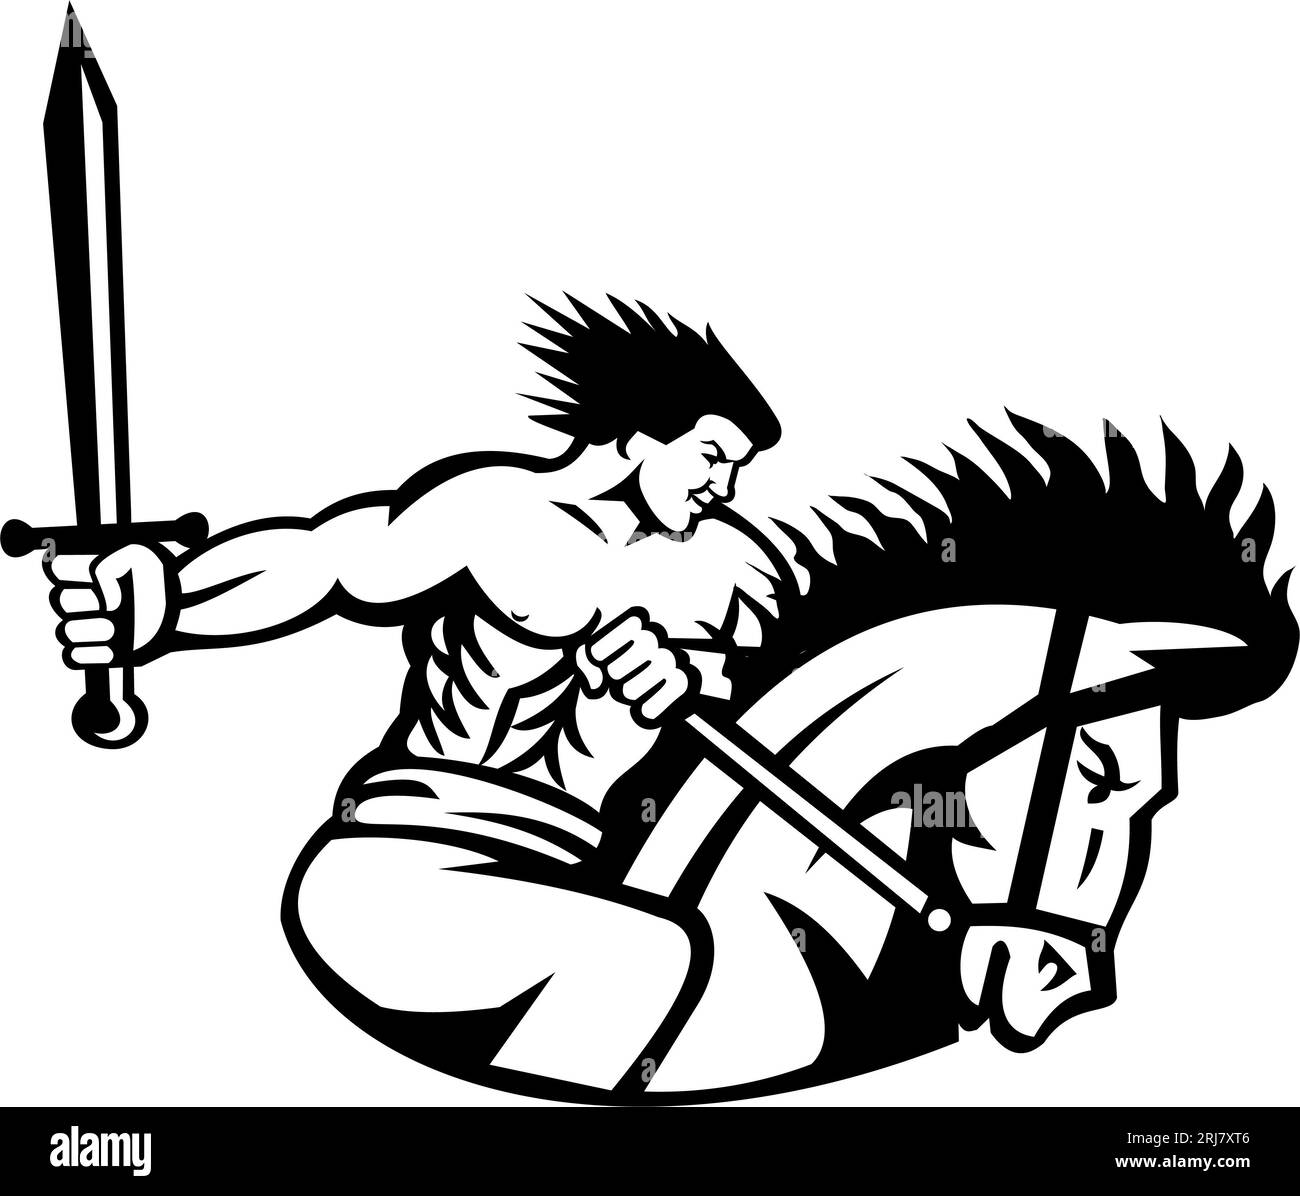 Mascot illustration of David of Sassoun or Sasun, an Armenian Hero, riding a horse with sword charging attacking viewed from sideon isolated backgroun Stock Photo